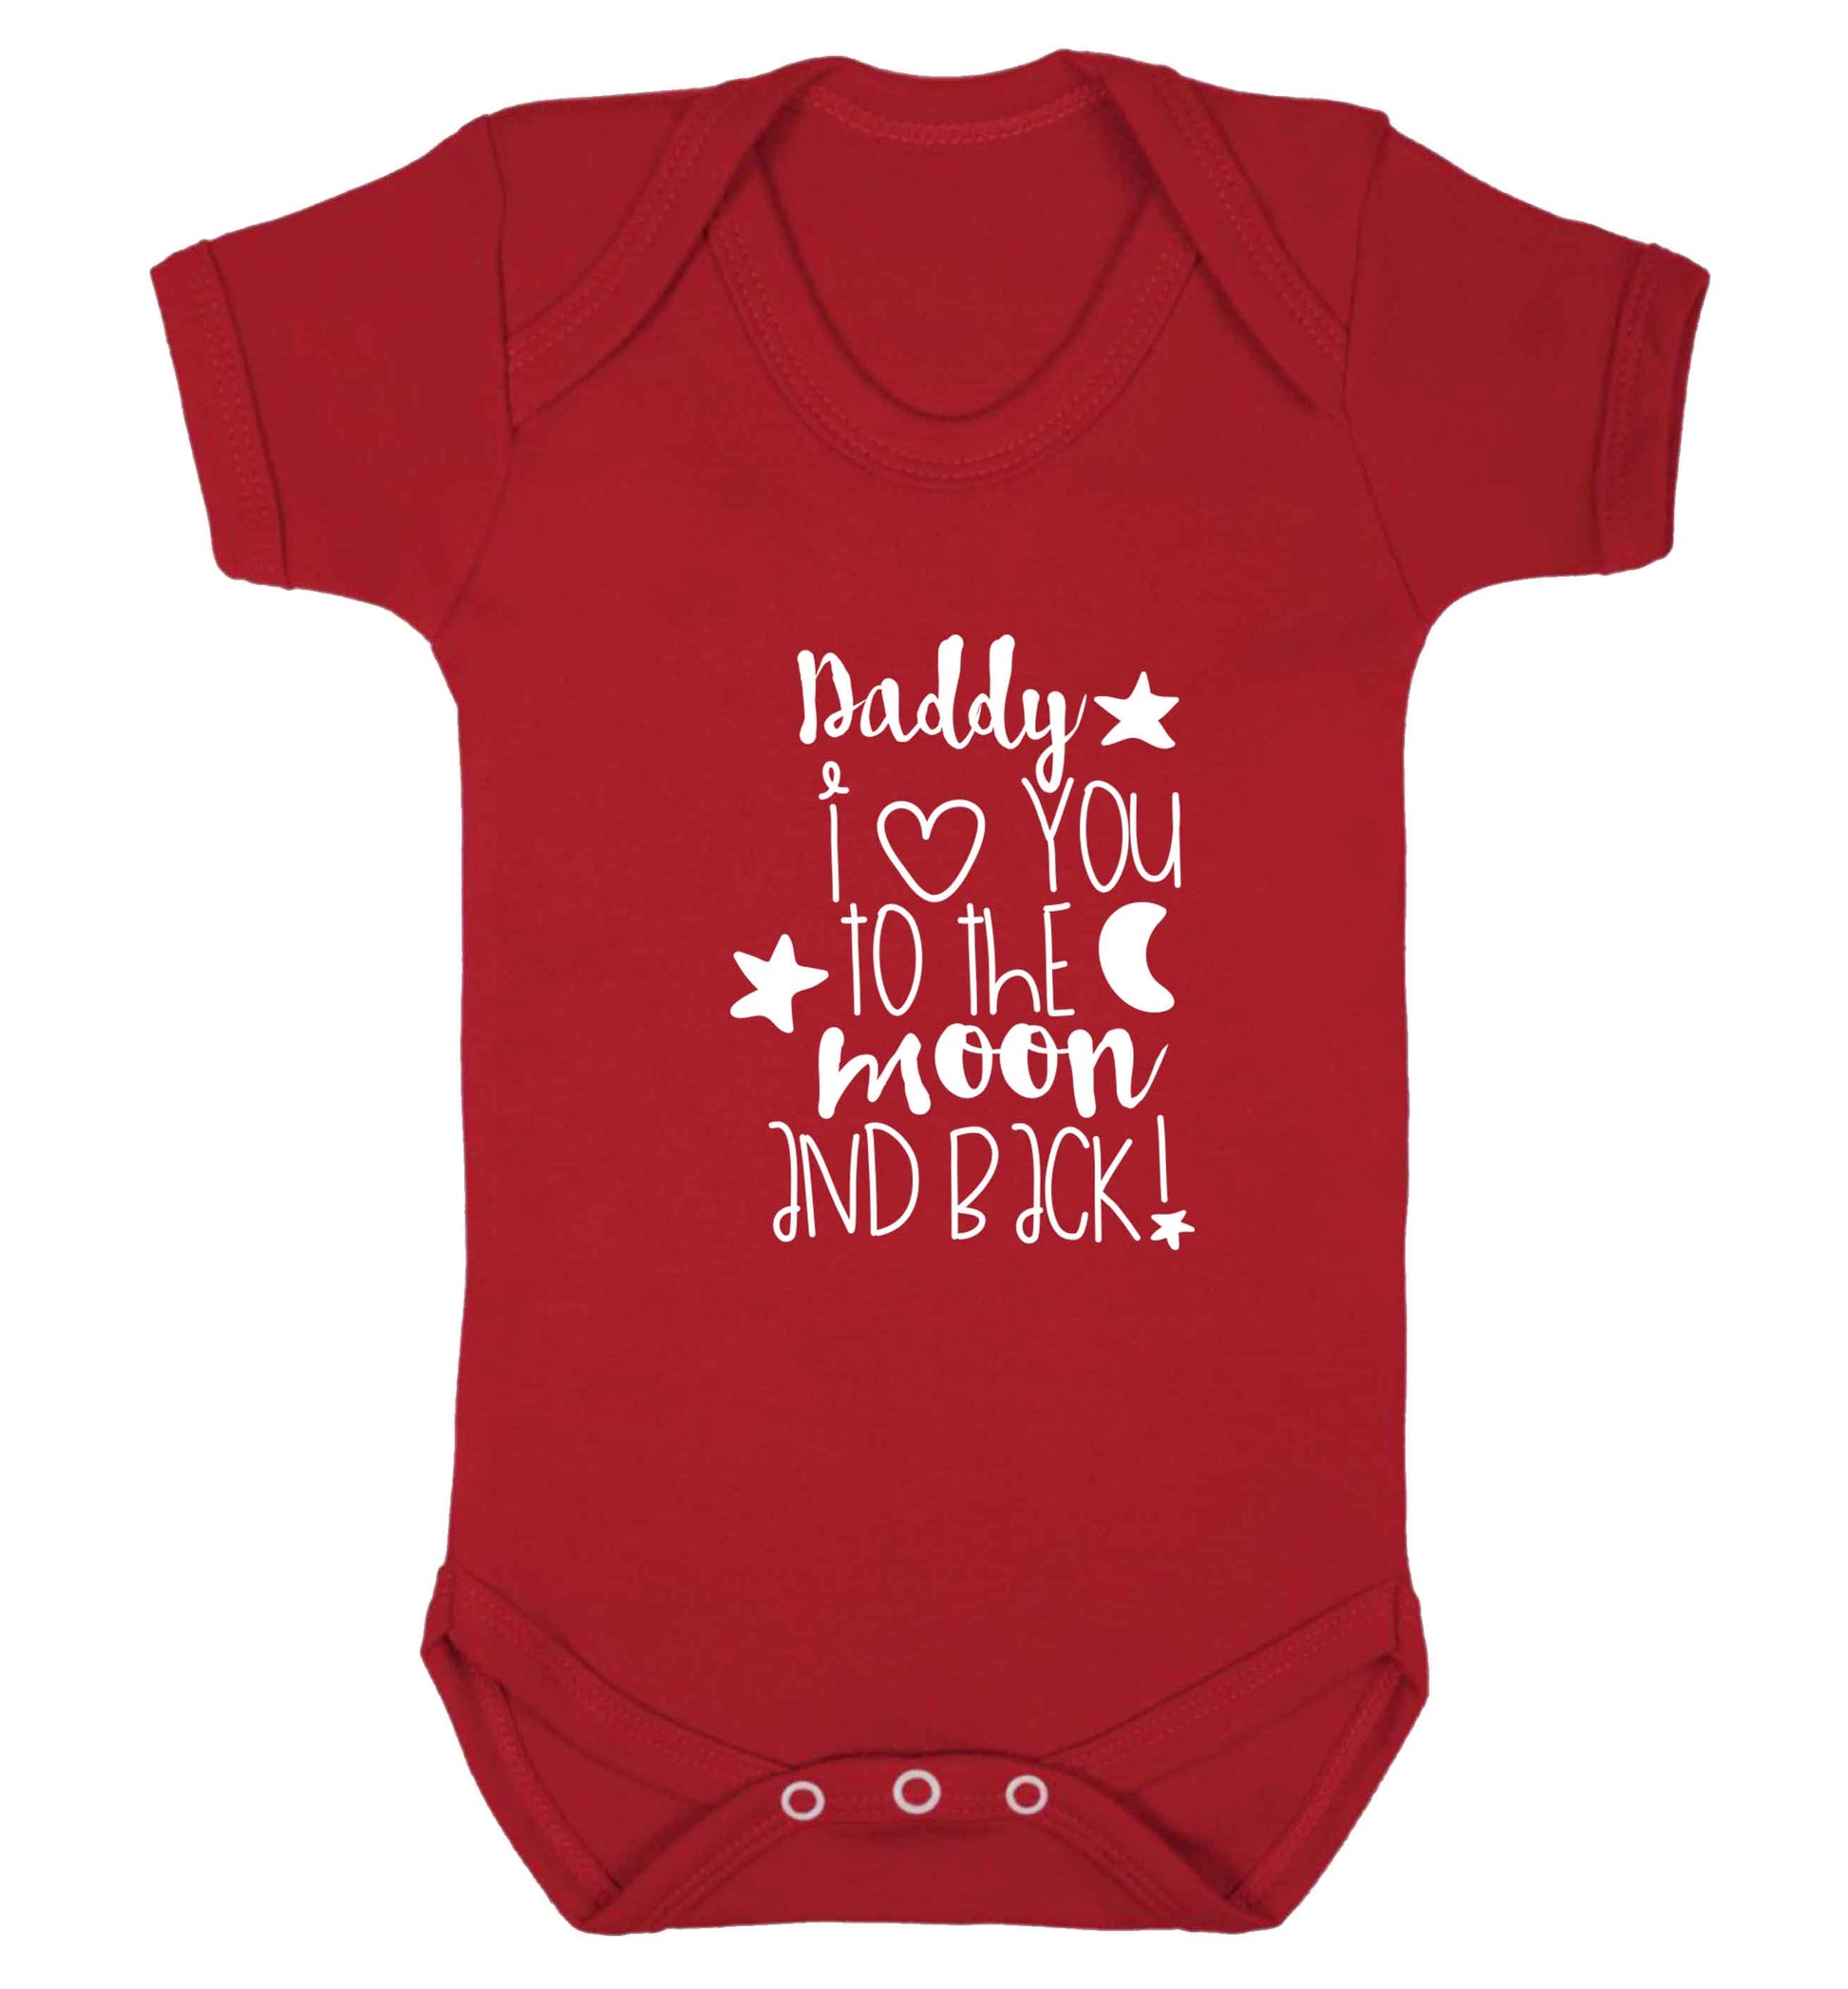 Daddy I love you to the moon and back baby vest red 18-24 months